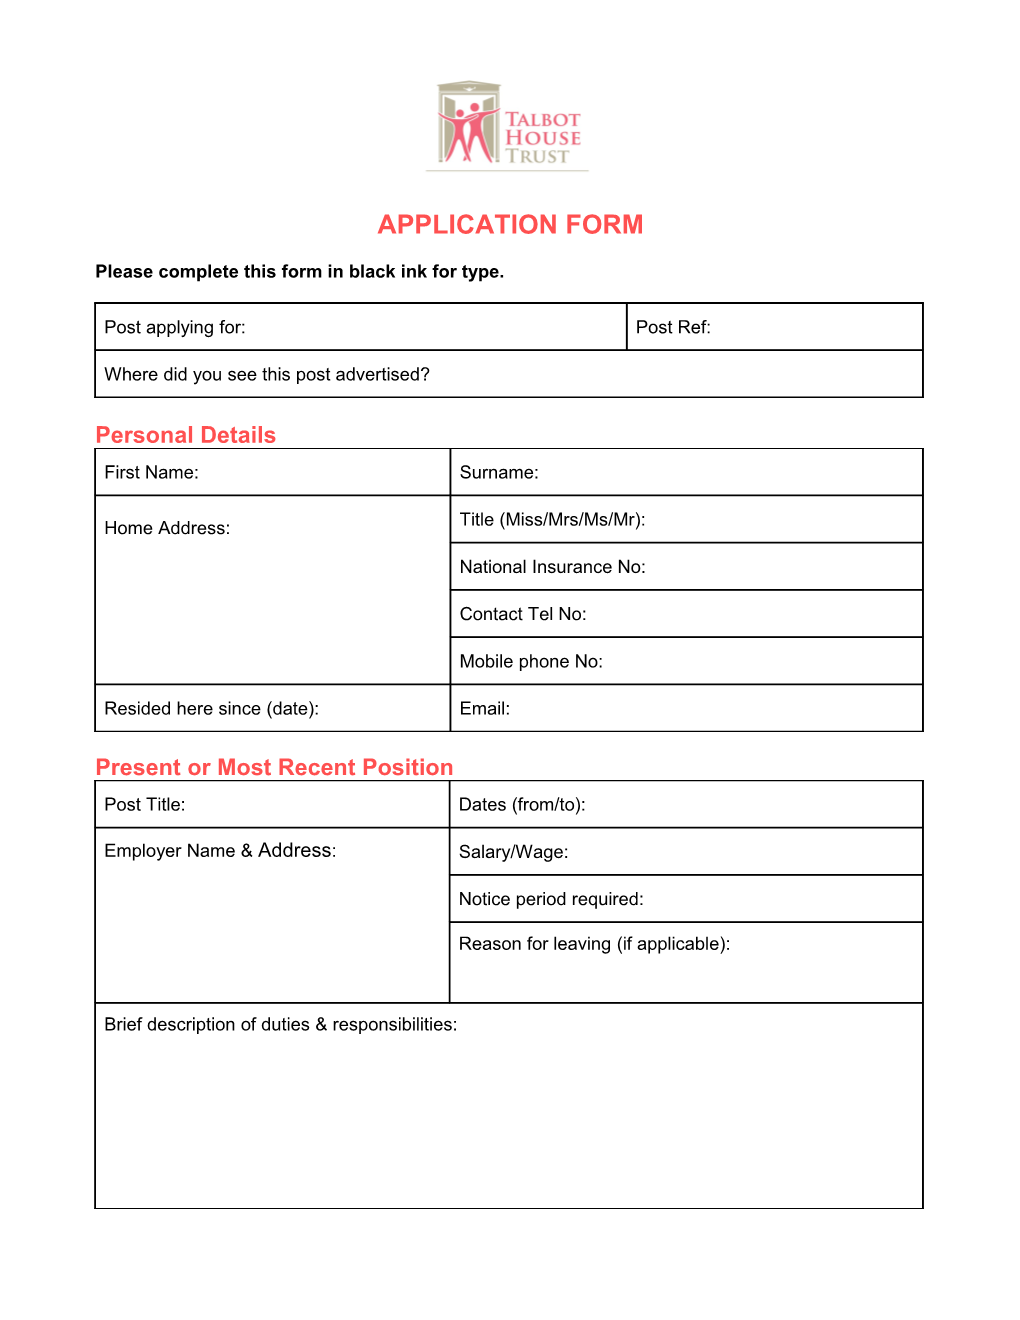 Please Complete This Form in Black Ink for Type